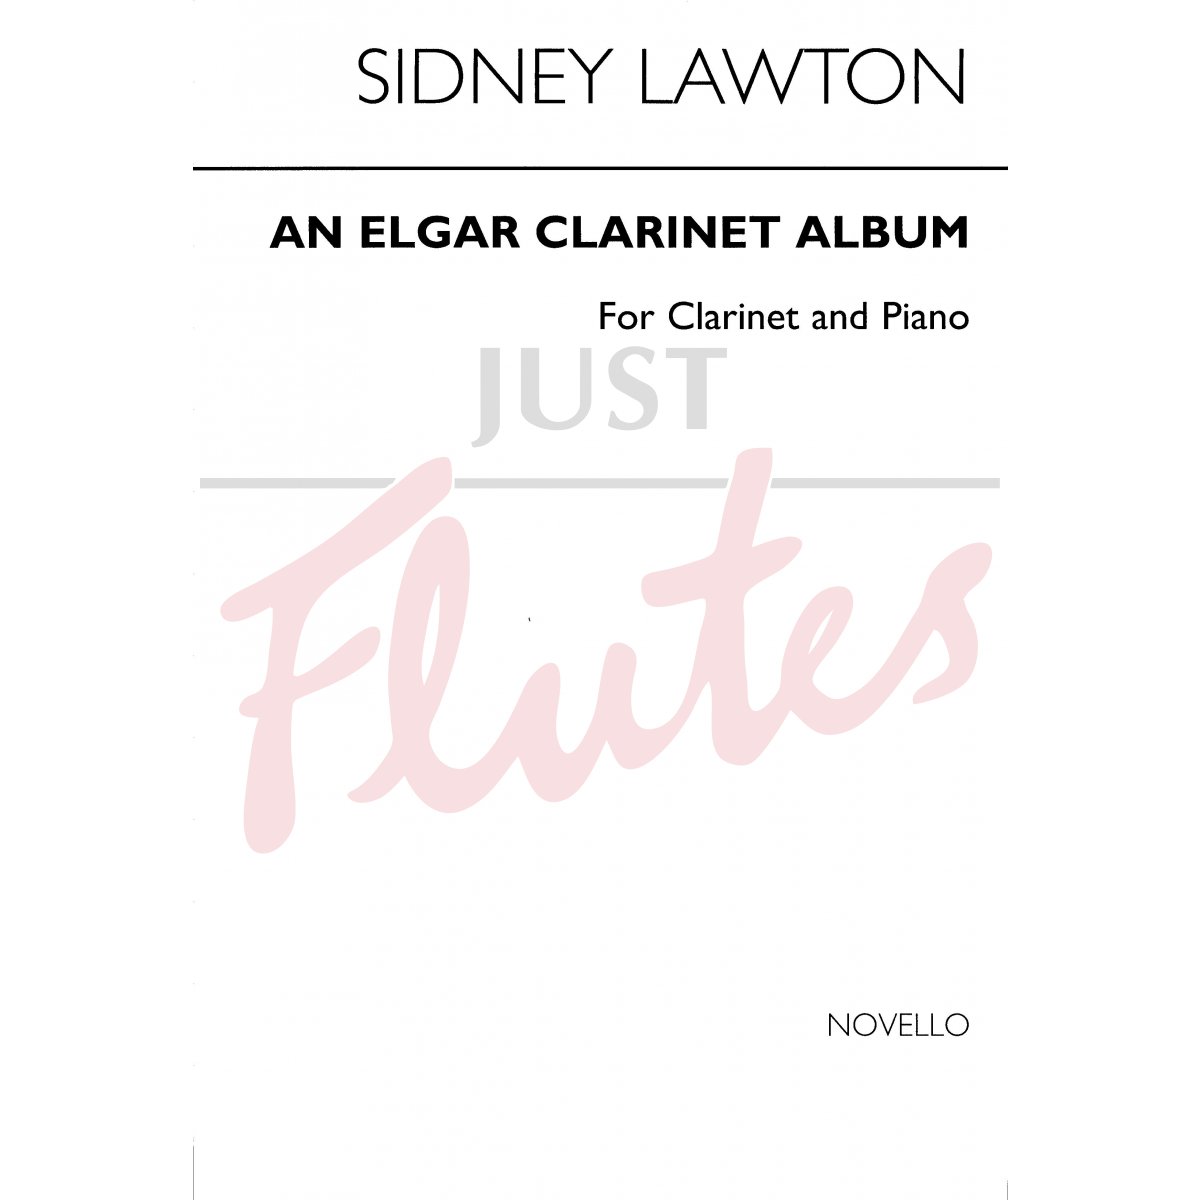 An Elgar Clarinet Album for Clarinet and Piano